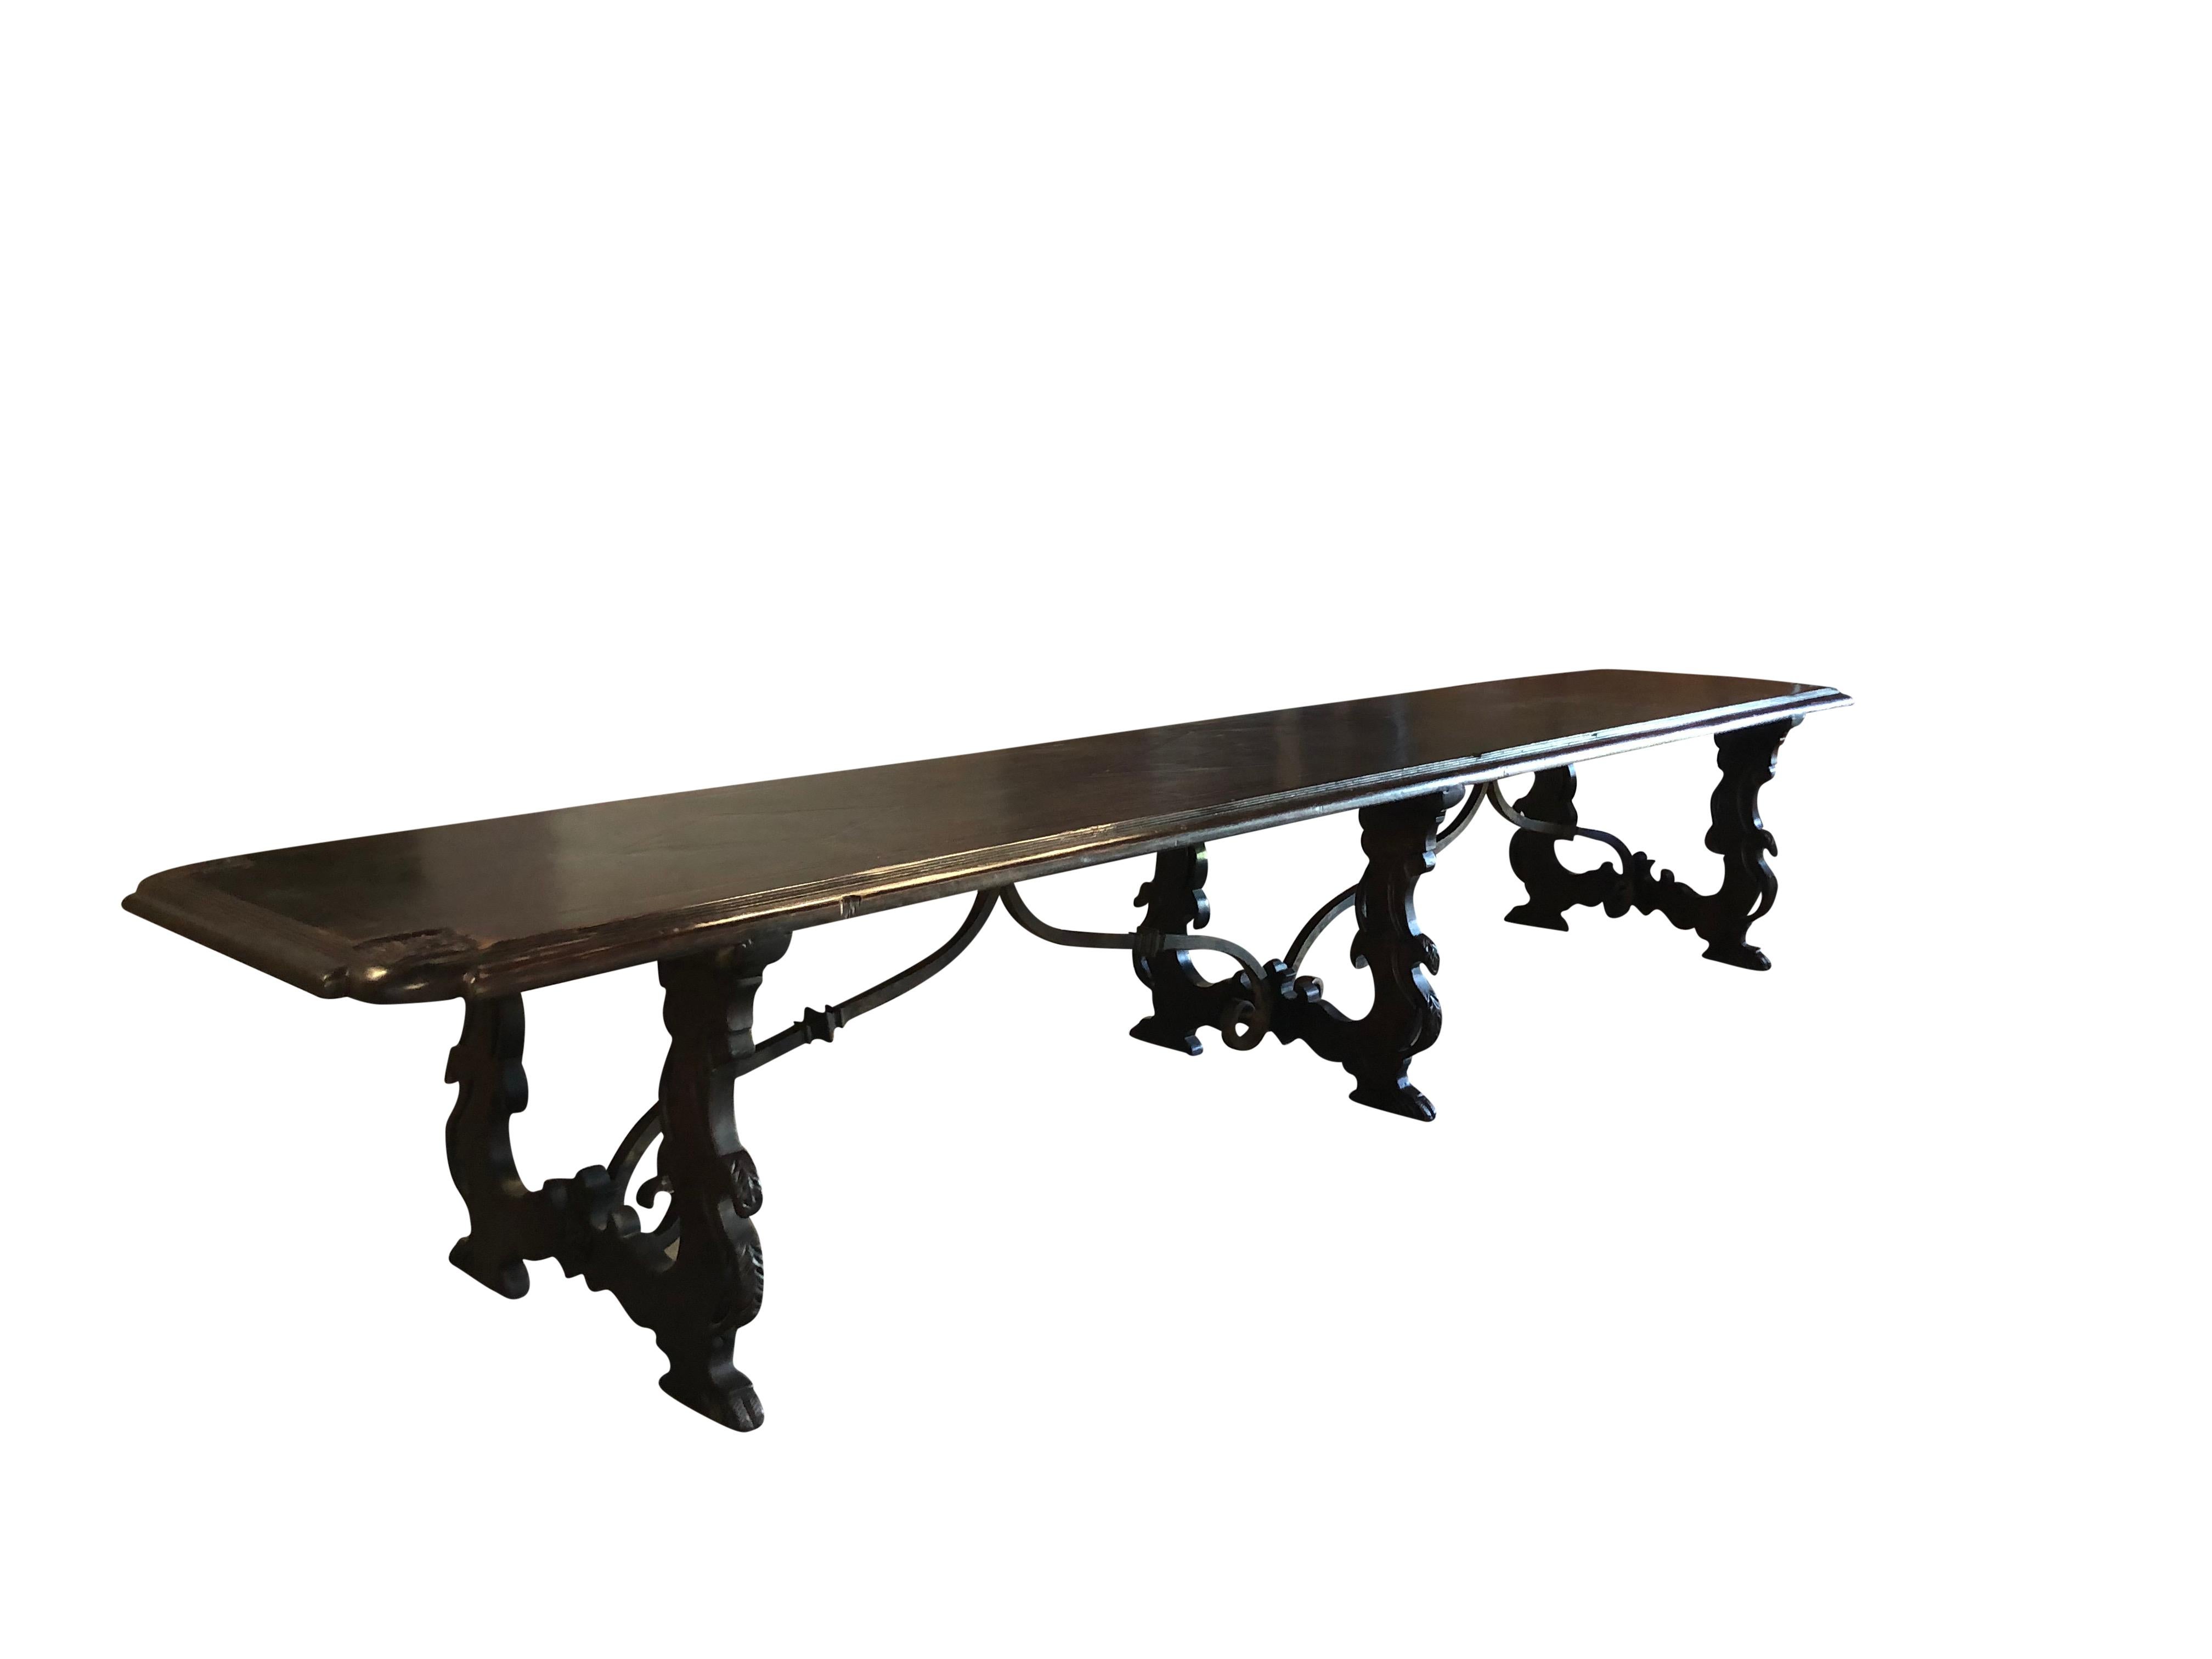 An important and over sized Italian Refectory table. The tabletop was carved by hand in a single dark walnut plank and is adorned with carved plate settings and has a Fleur-de-Lys engraved on each corner. The top is raised on shaped trestle ends and